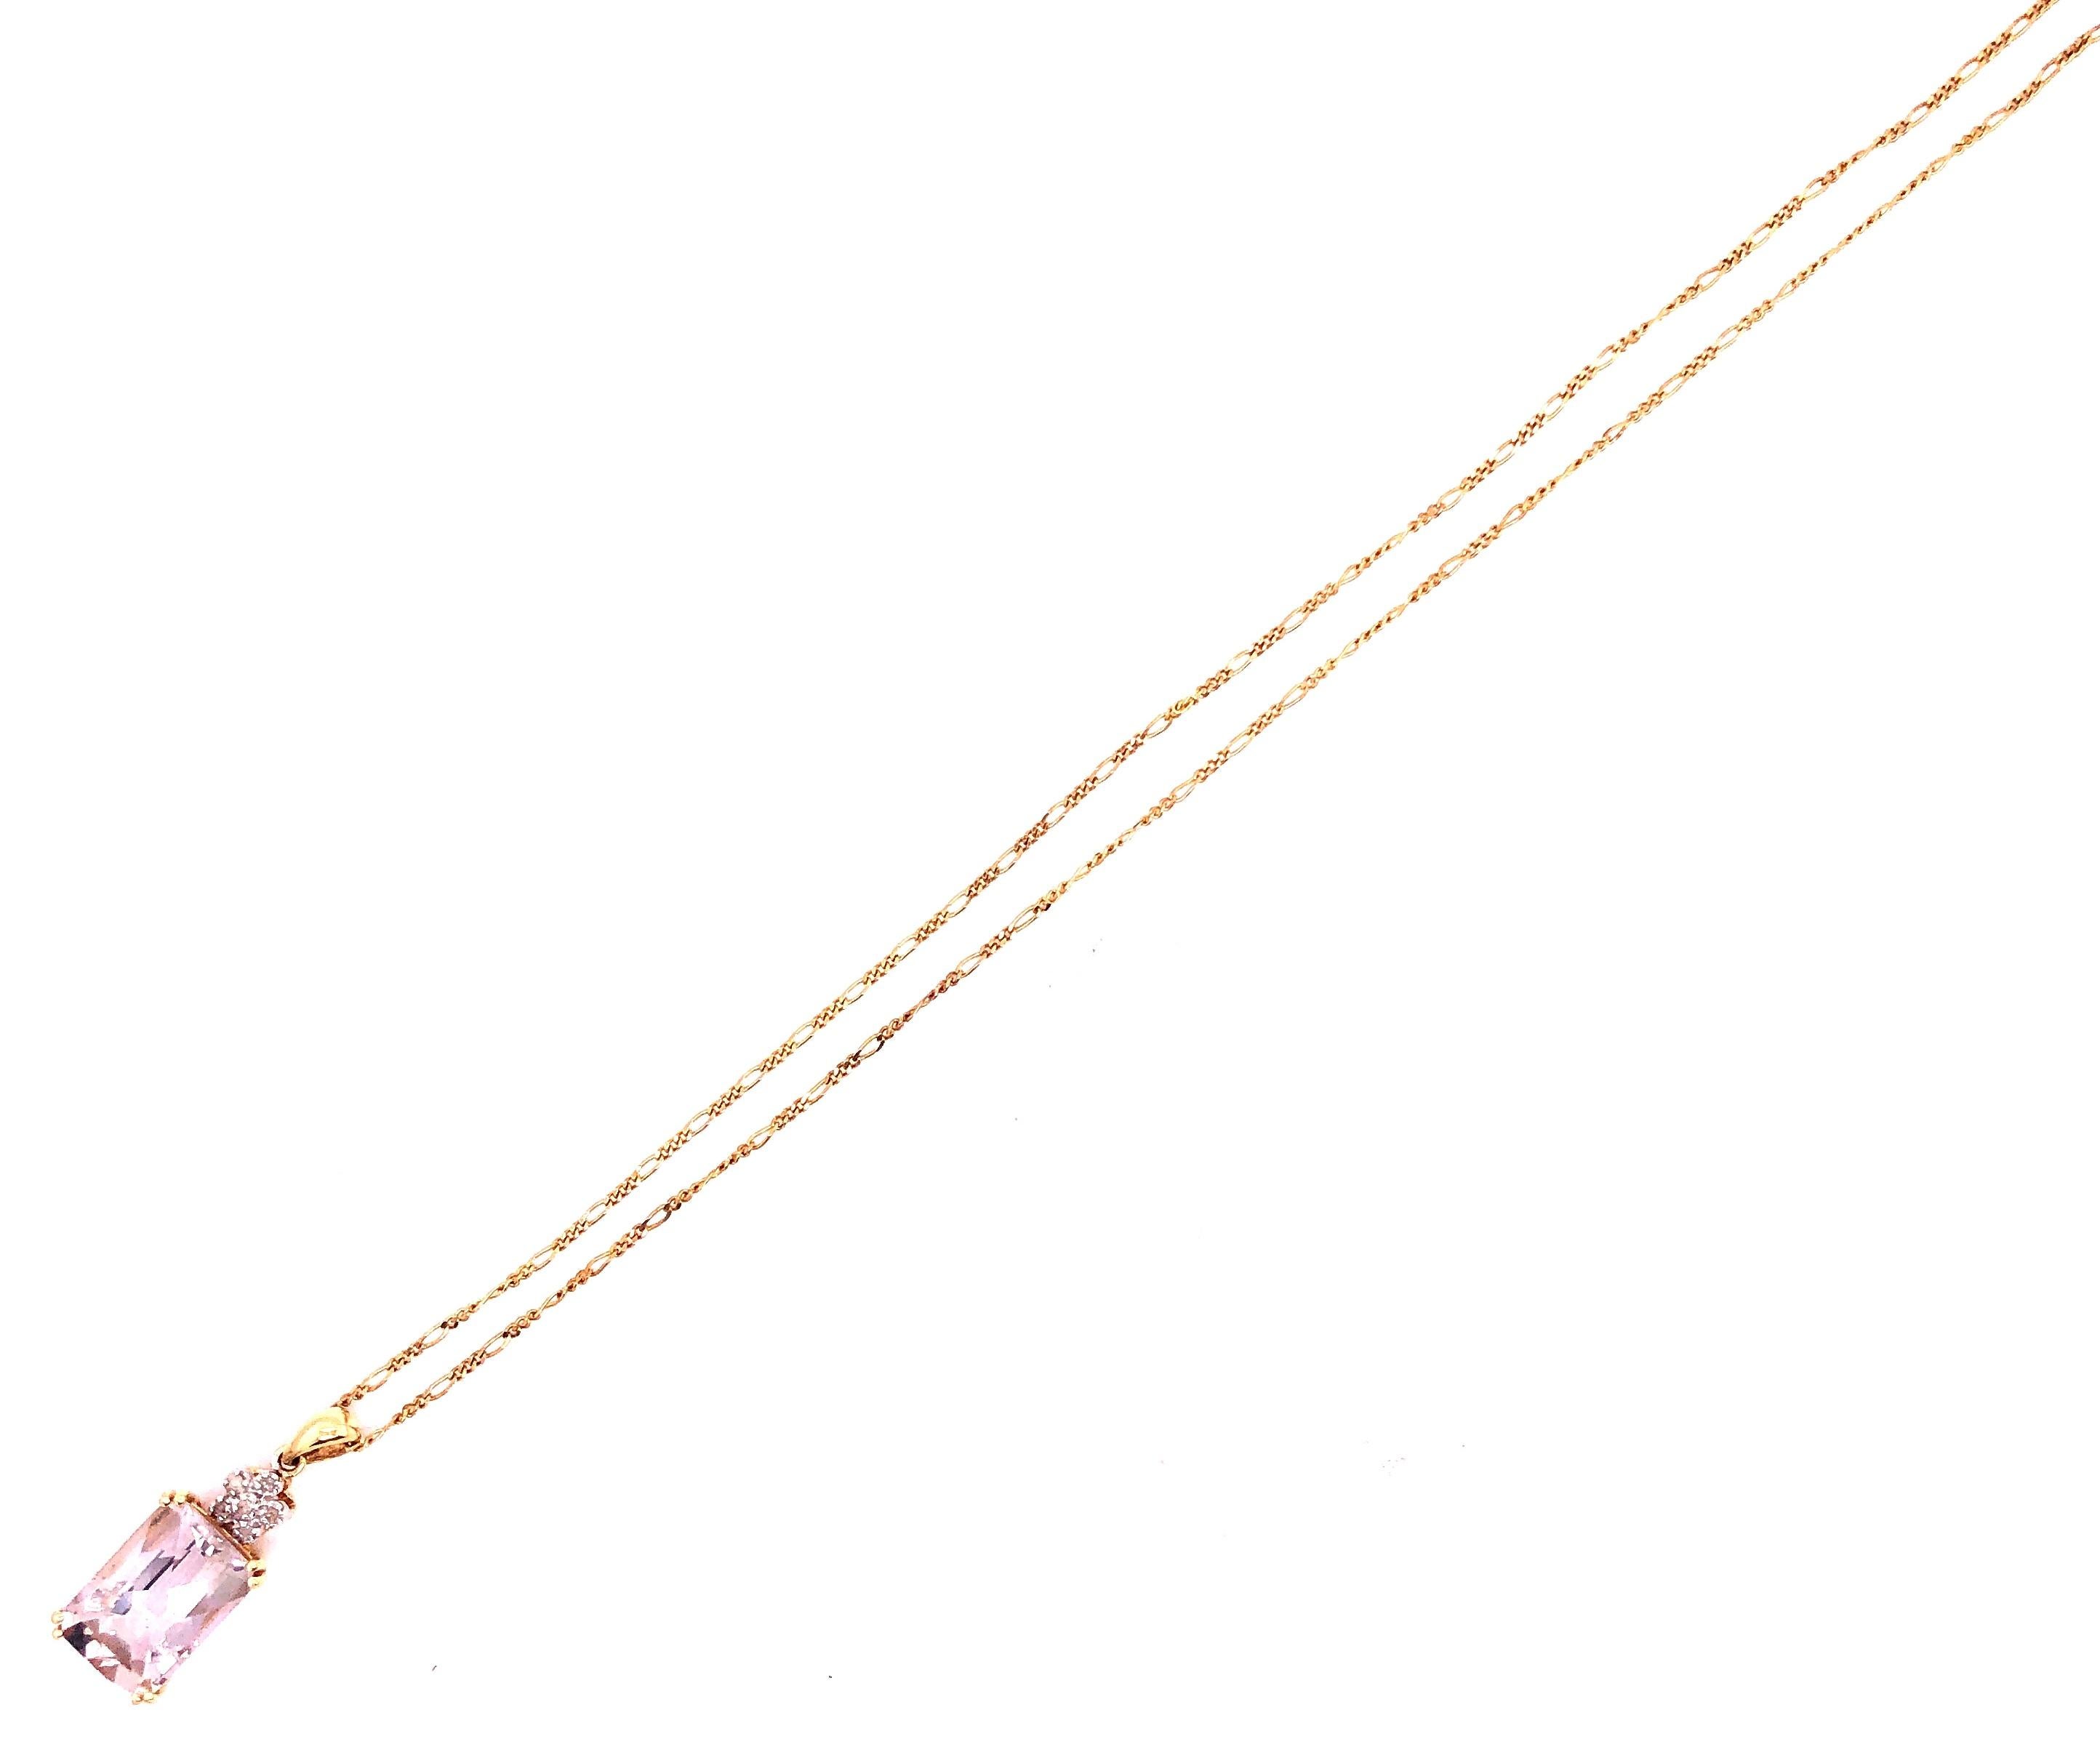 Women's or Men's 14 Karat Yellow Gold Necklace with Semi Precious Stone Pendant For Sale